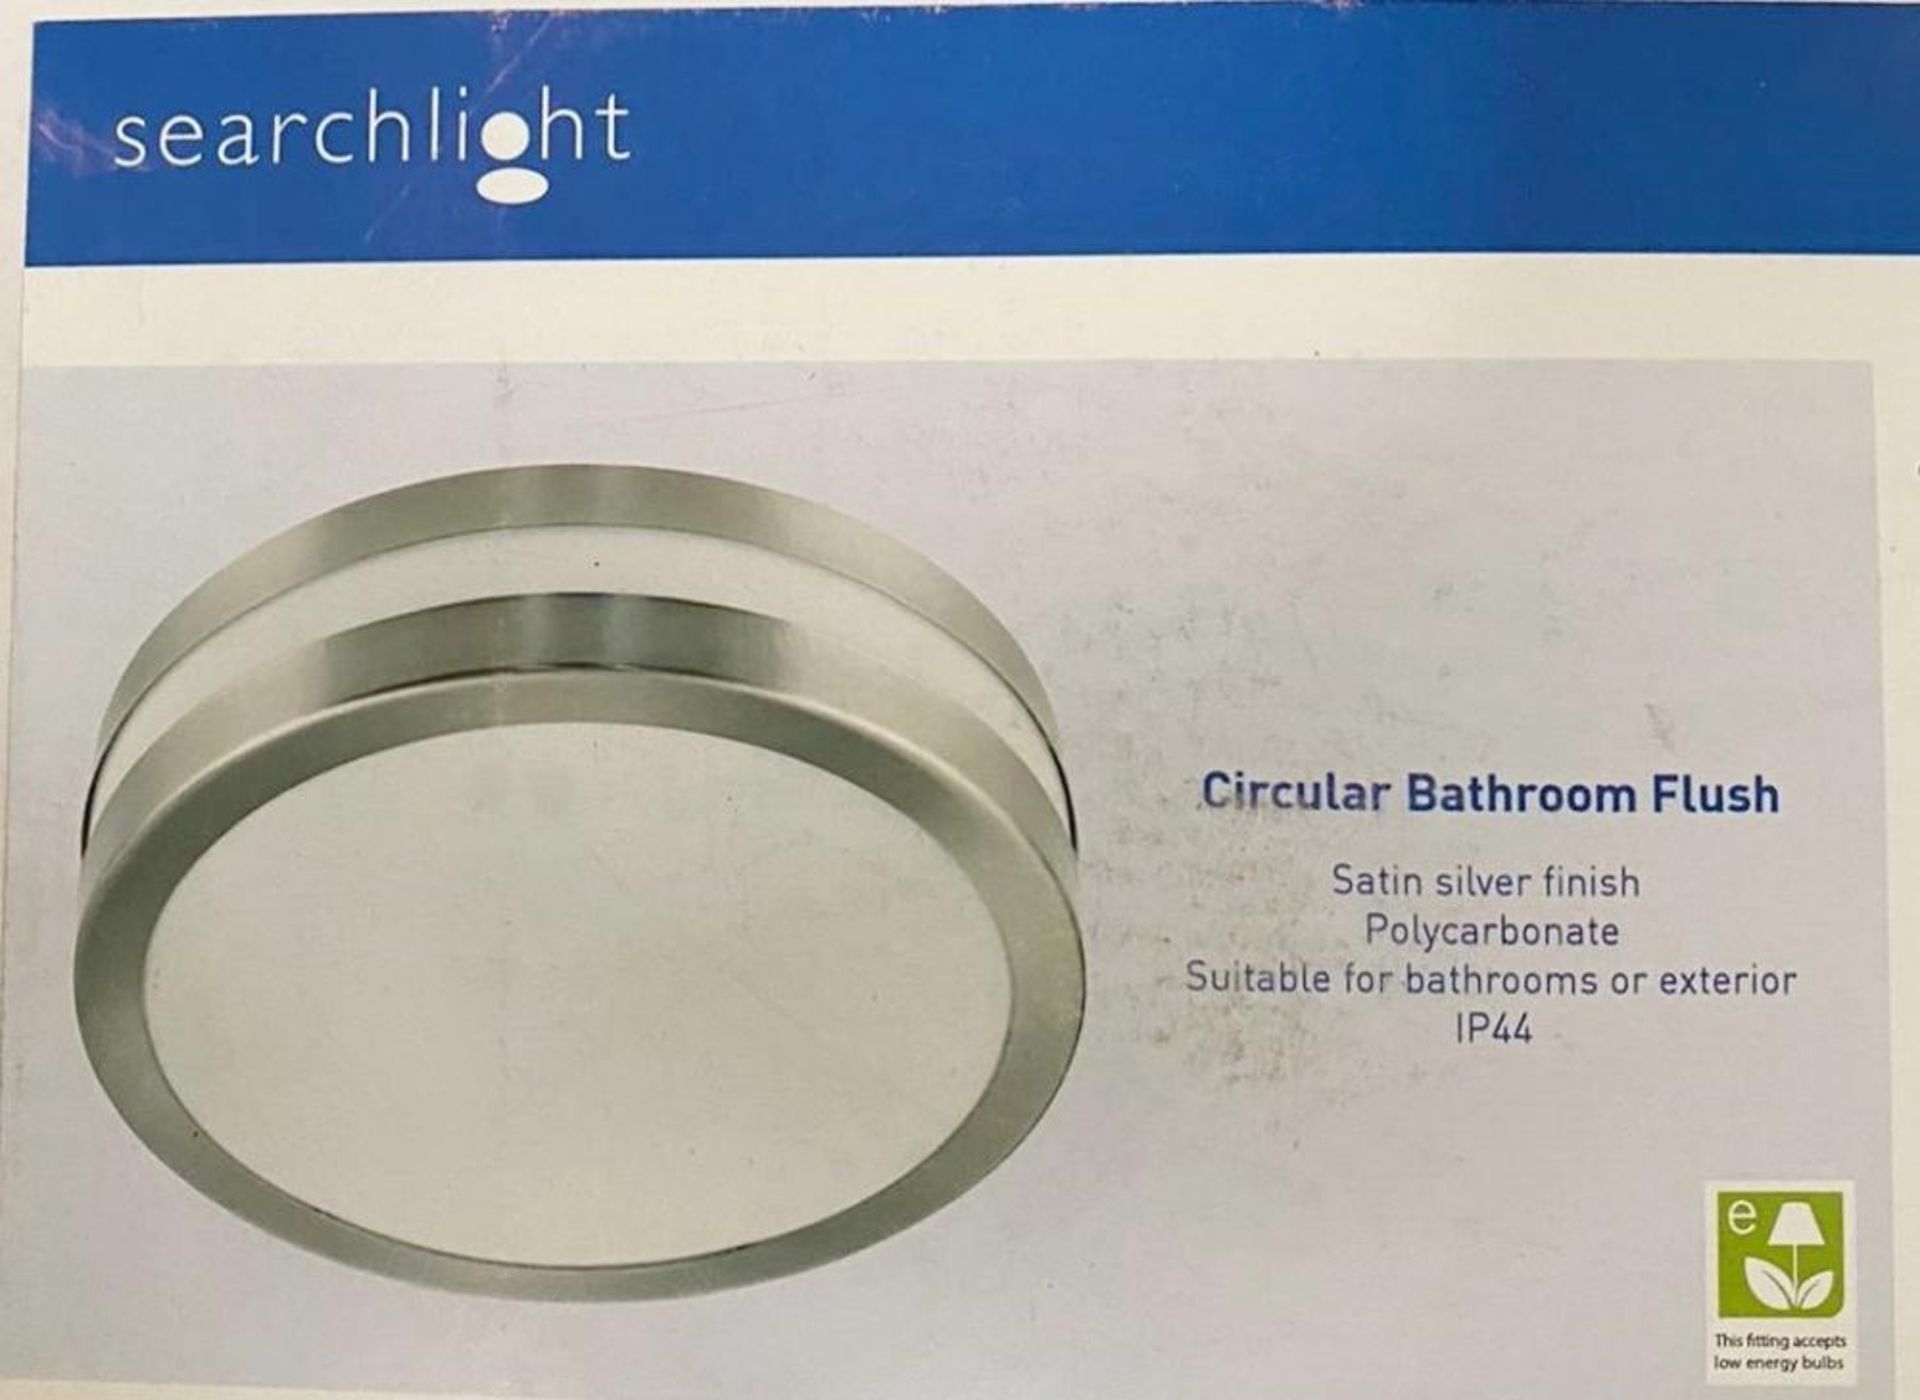 1 x Searchlight Circular Bathroom Flush satin silver finish- Ref: 2641-28 - New And Boxed Stock - AA - Image 3 of 3